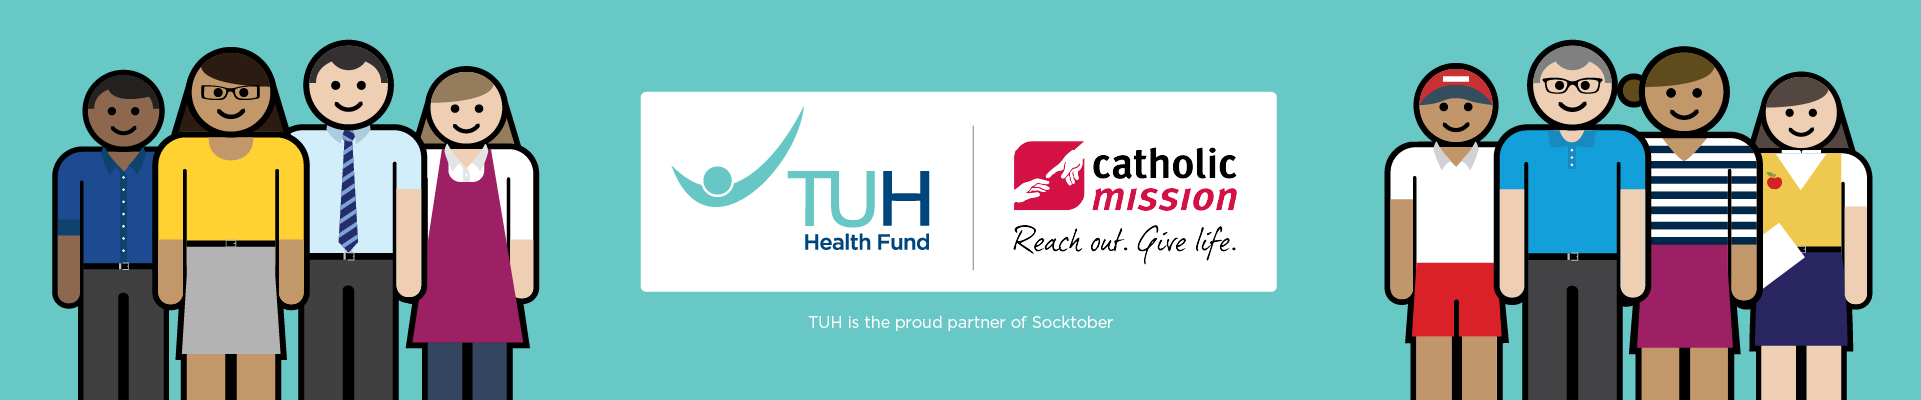 TUH health fund and catholic mission logo banner